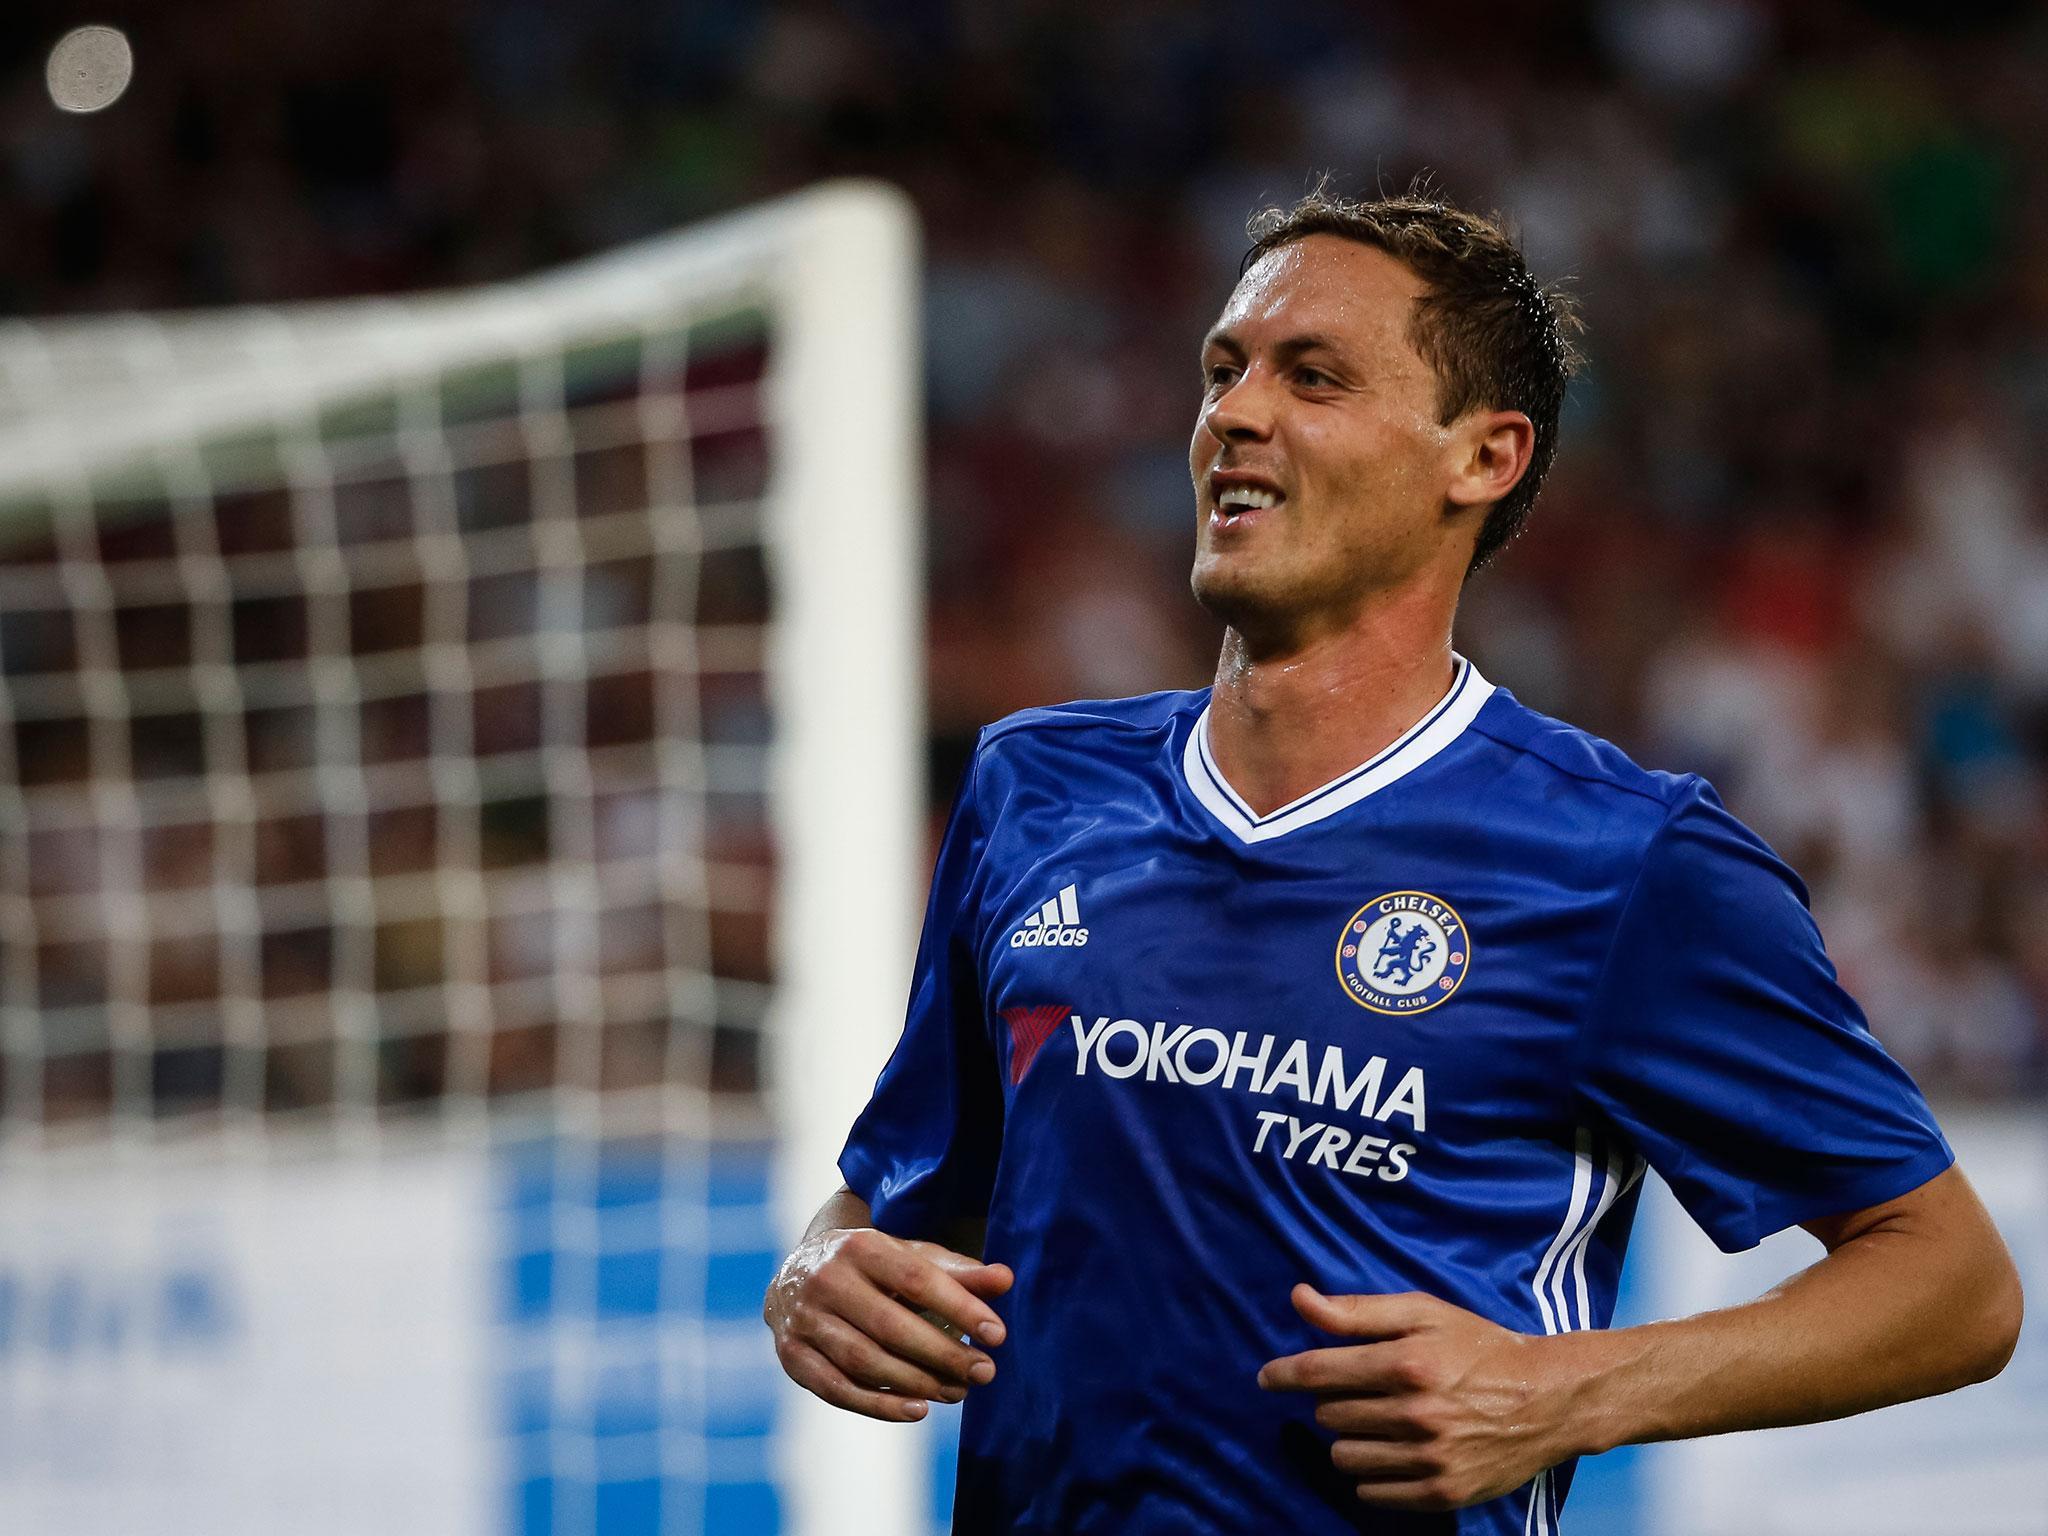 Manchester United are set to step up their interest in Chelsea's Nemanja Matic